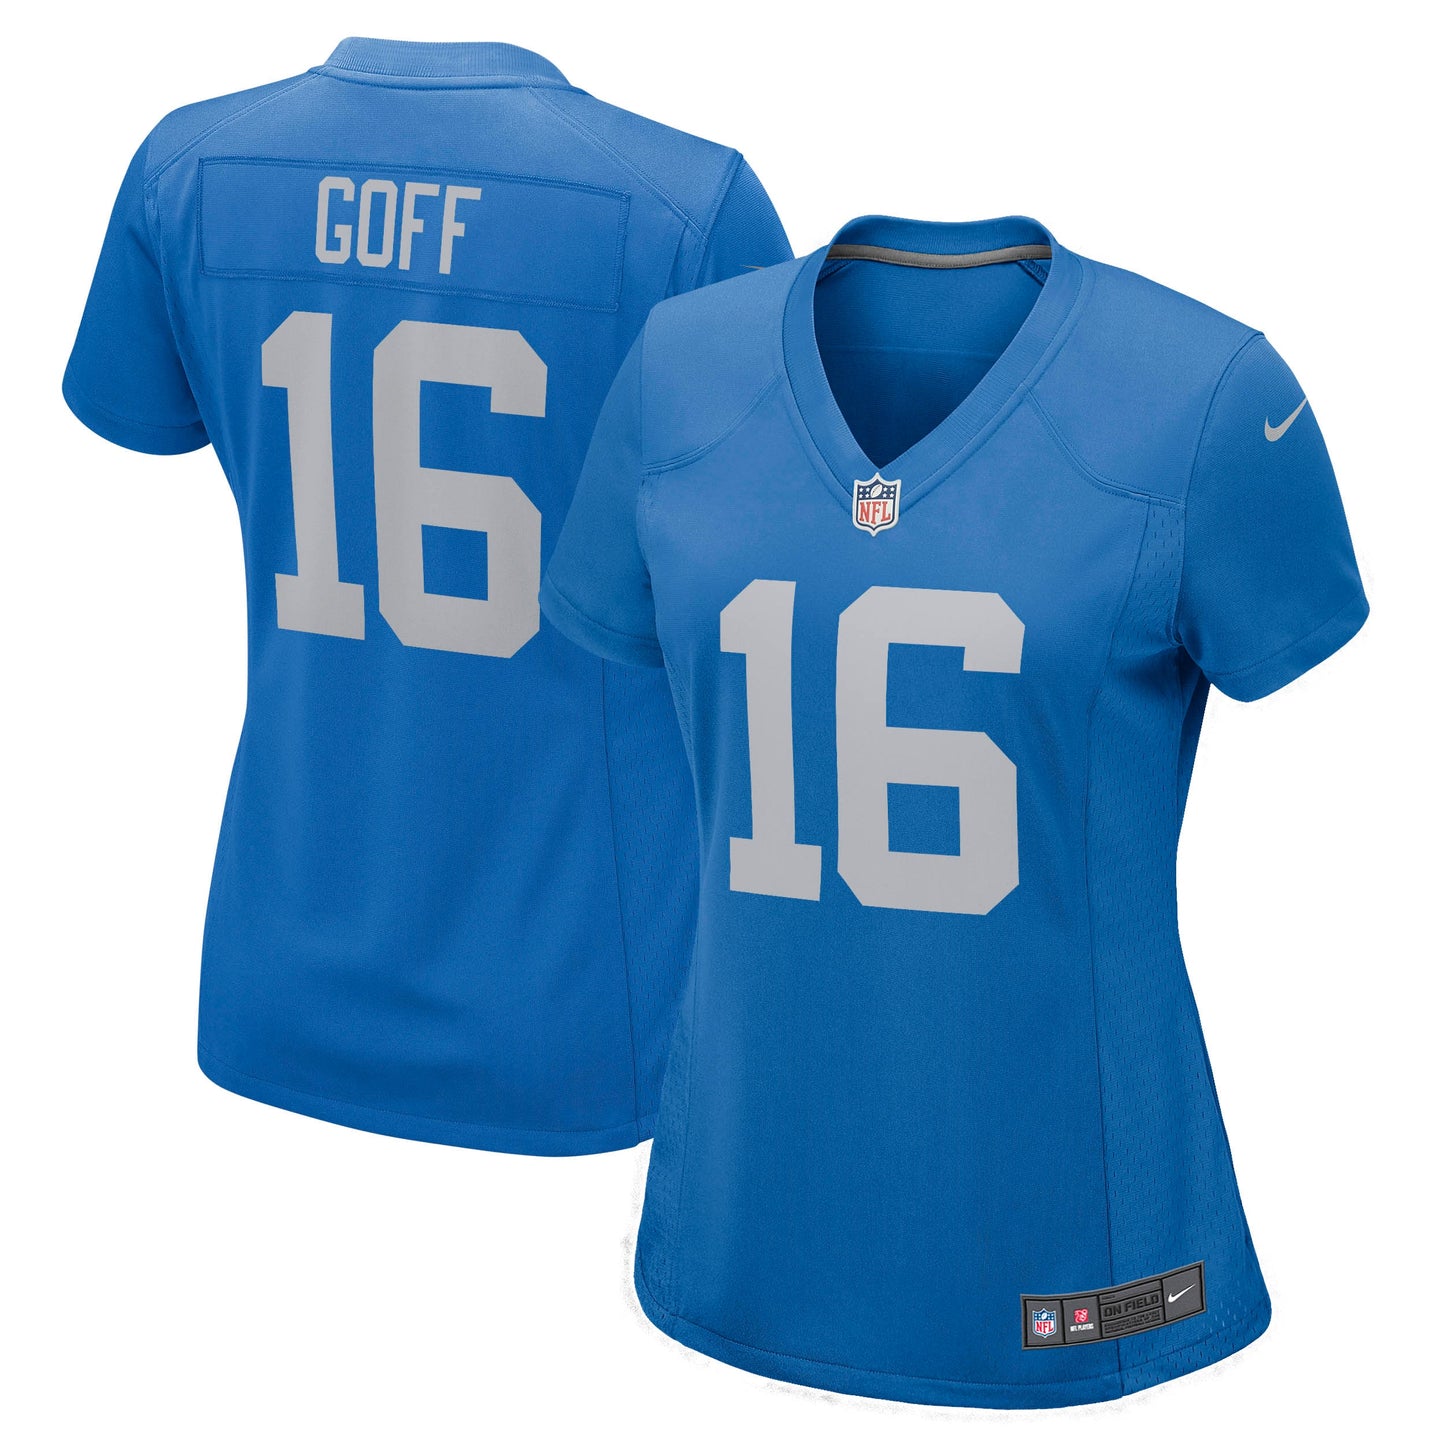 Jared Goff Detroit Lions Nike Women's Game Player Jersey - Blue